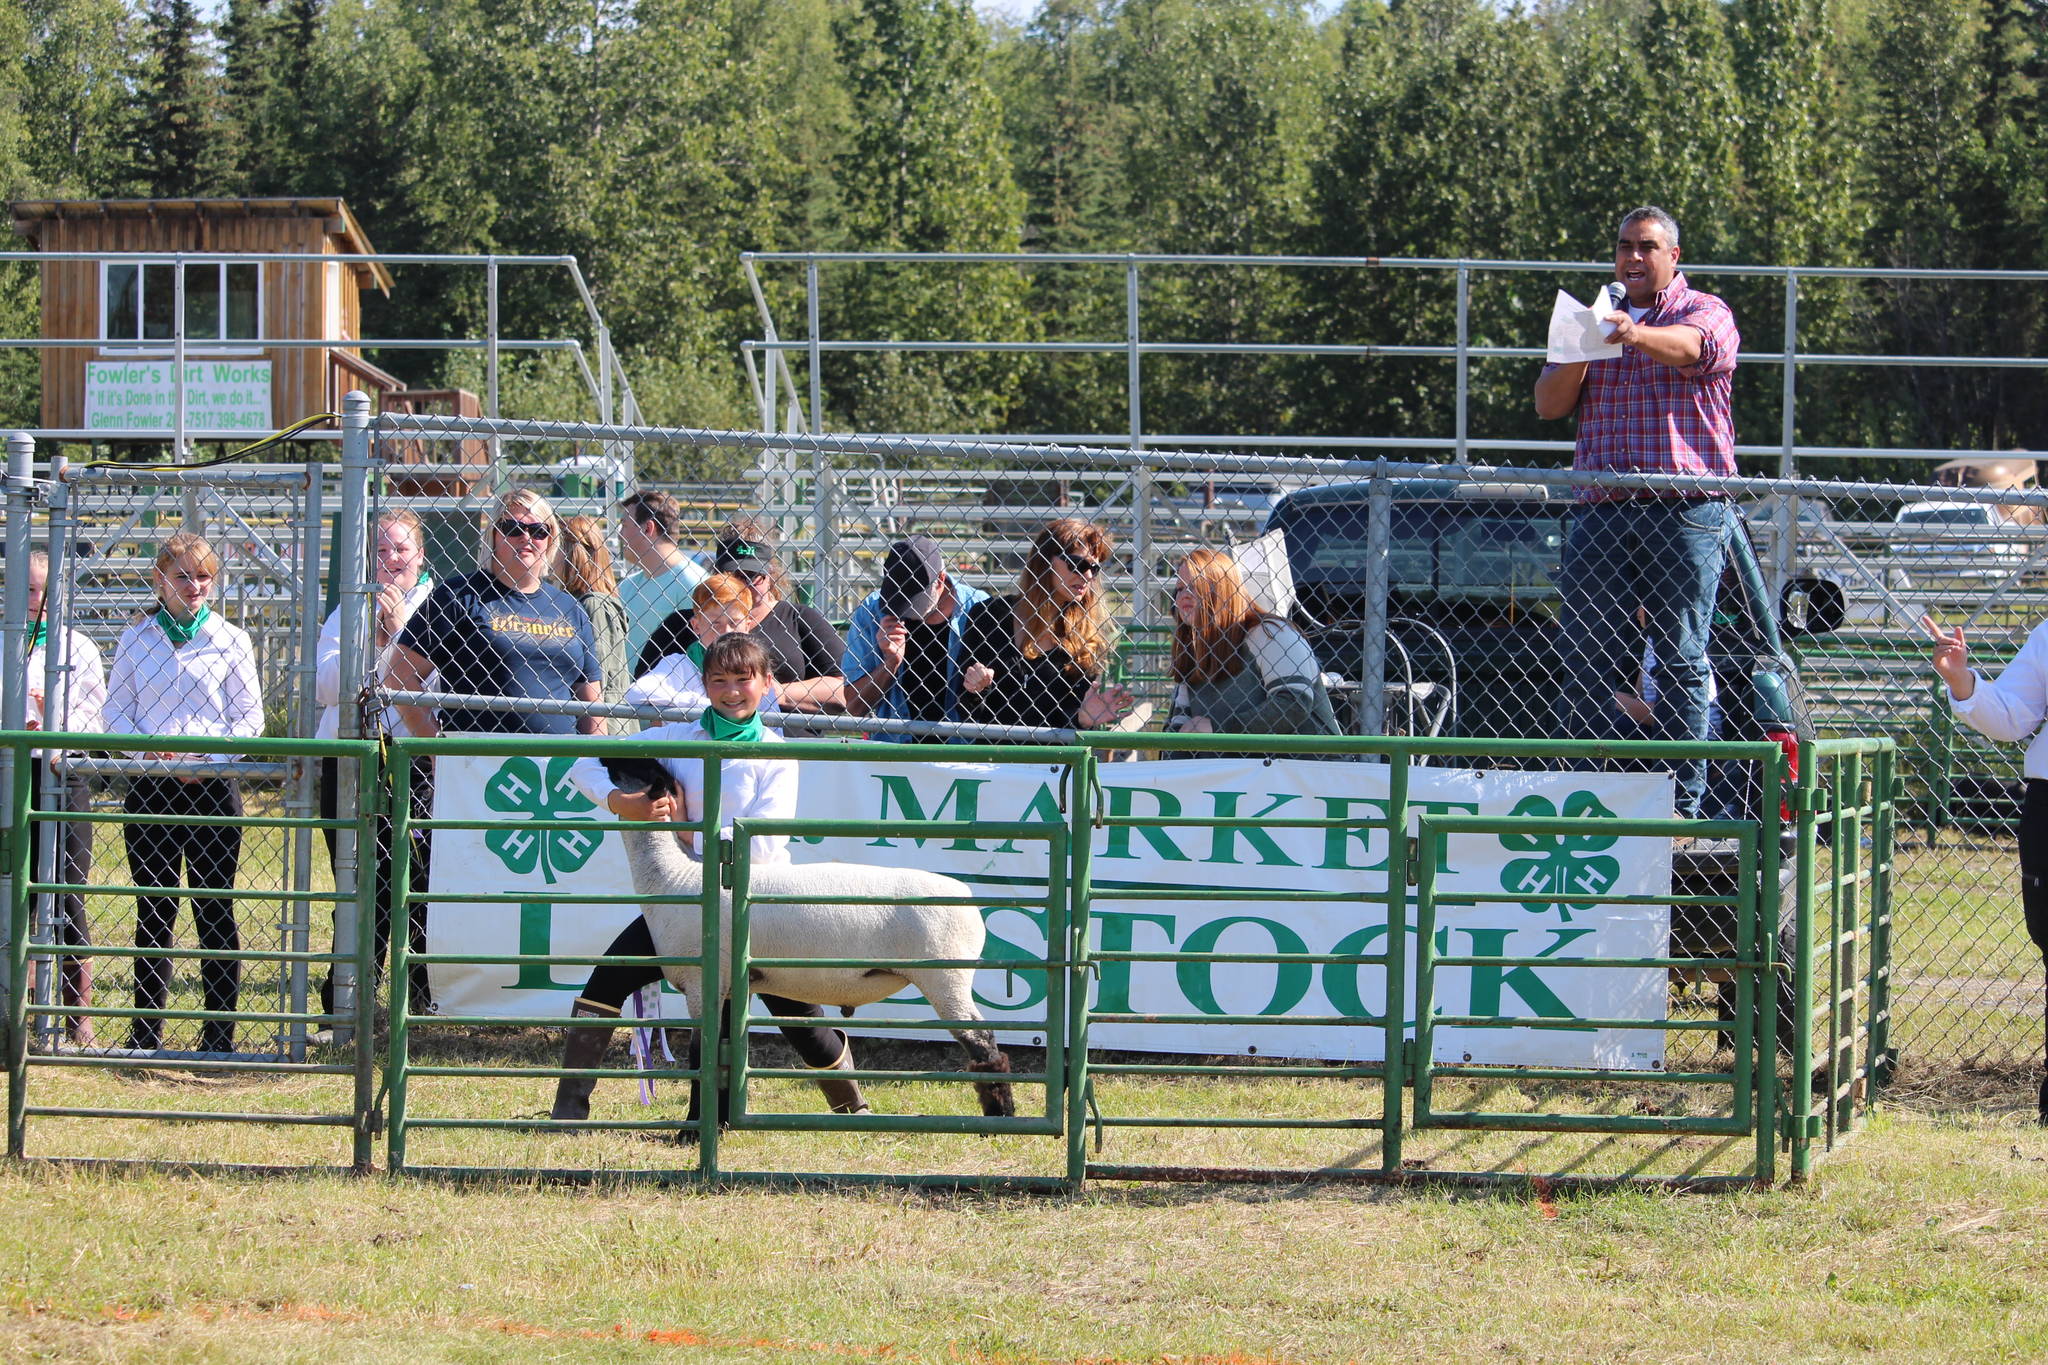 Xinlan Tanner shows off her Grand Champion Lamb as auctioneer Rayne Reynolds, top right, takes bids during the 4-H Junior Market Drive-in Auction at the Soldotna Rodeo Grounds on Aug. 15, 2020. (Photo by Brian Mazurek/Peninsula Clarion)